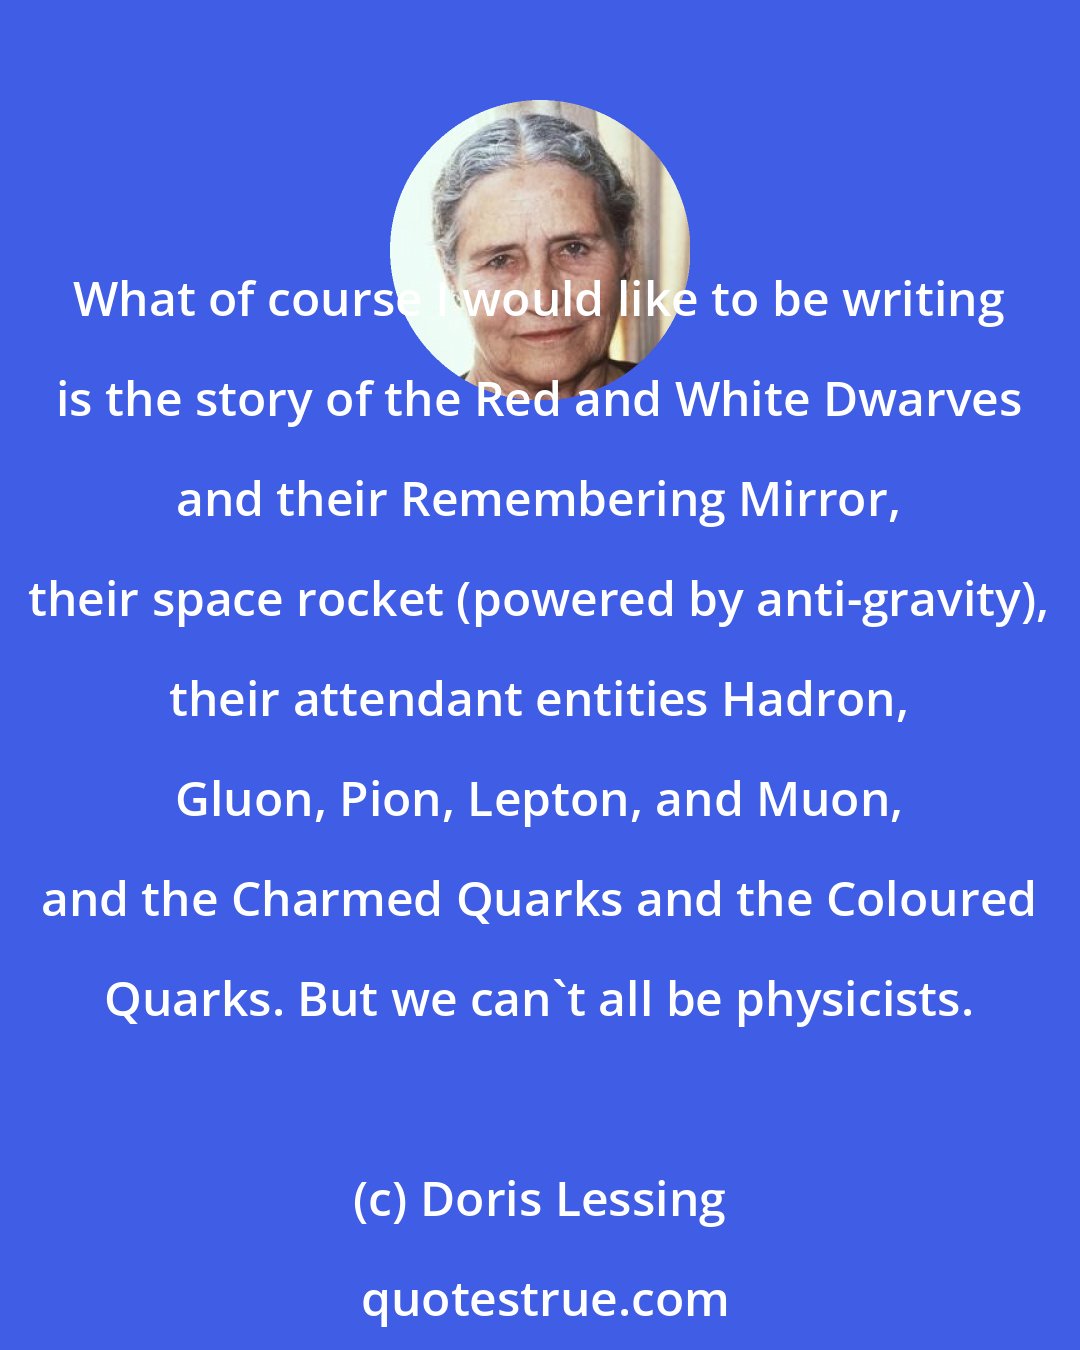 Doris Lessing: What of course I would like to be writing is the story of the Red and White Dwarves and their Remembering Mirror, their space rocket (powered by anti-gravity), their attendant entities Hadron, Gluon, Pion, Lepton, and Muon, and the Charmed Quarks and the Coloured Quarks. But we can't all be physicists.